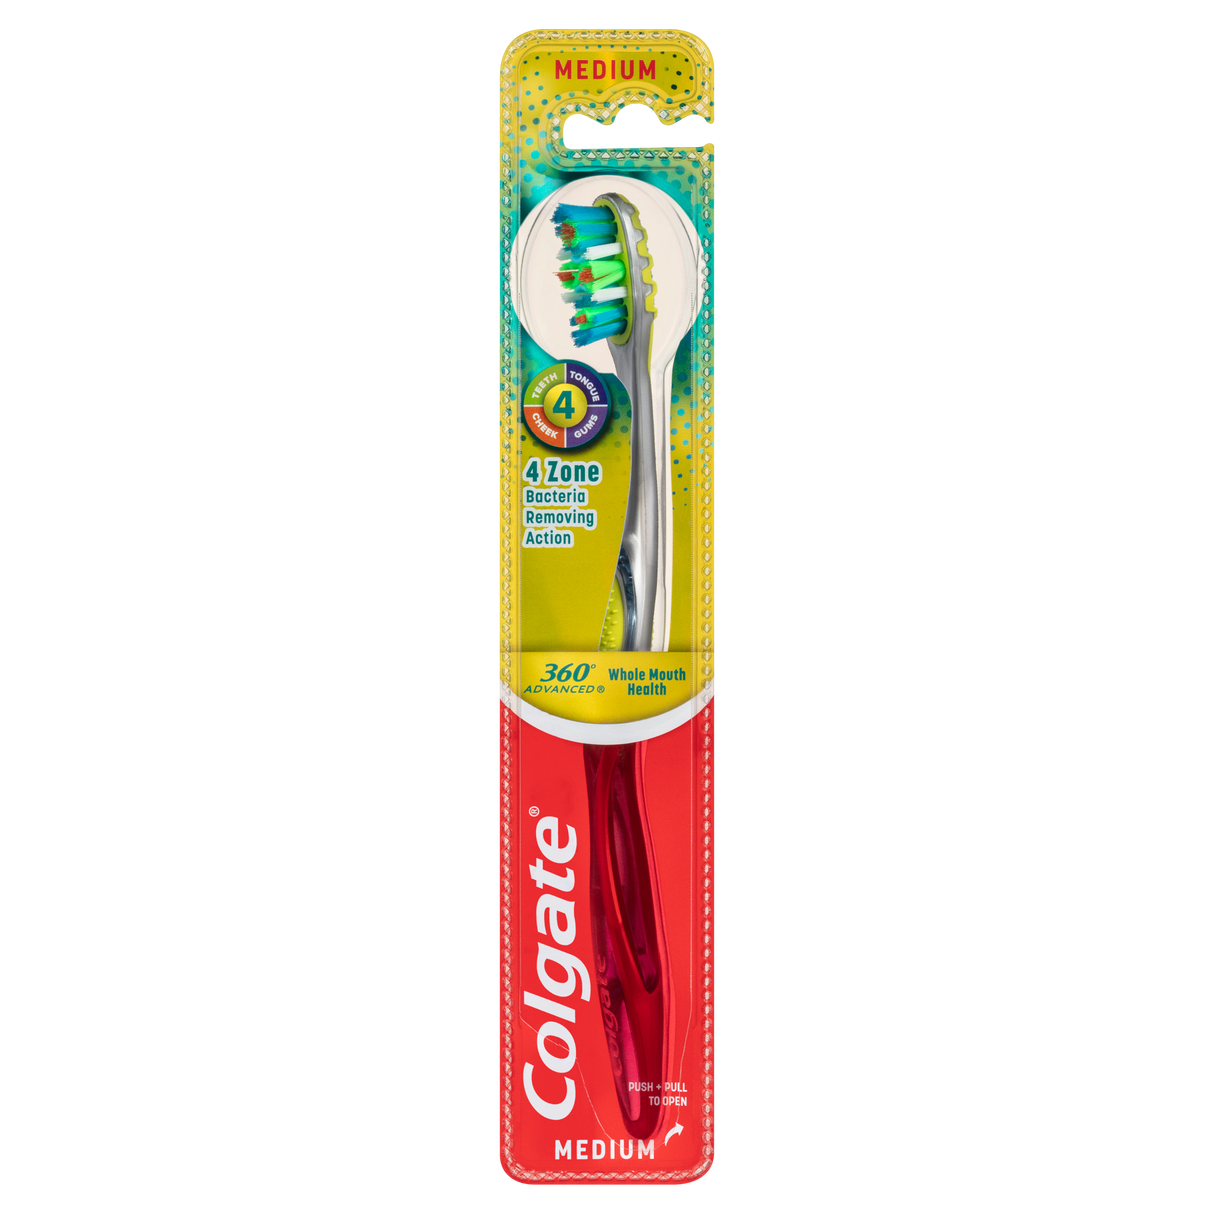 Colgate 360 Advanced Whole Mouth Health Toothbrush Medium 1 Pack